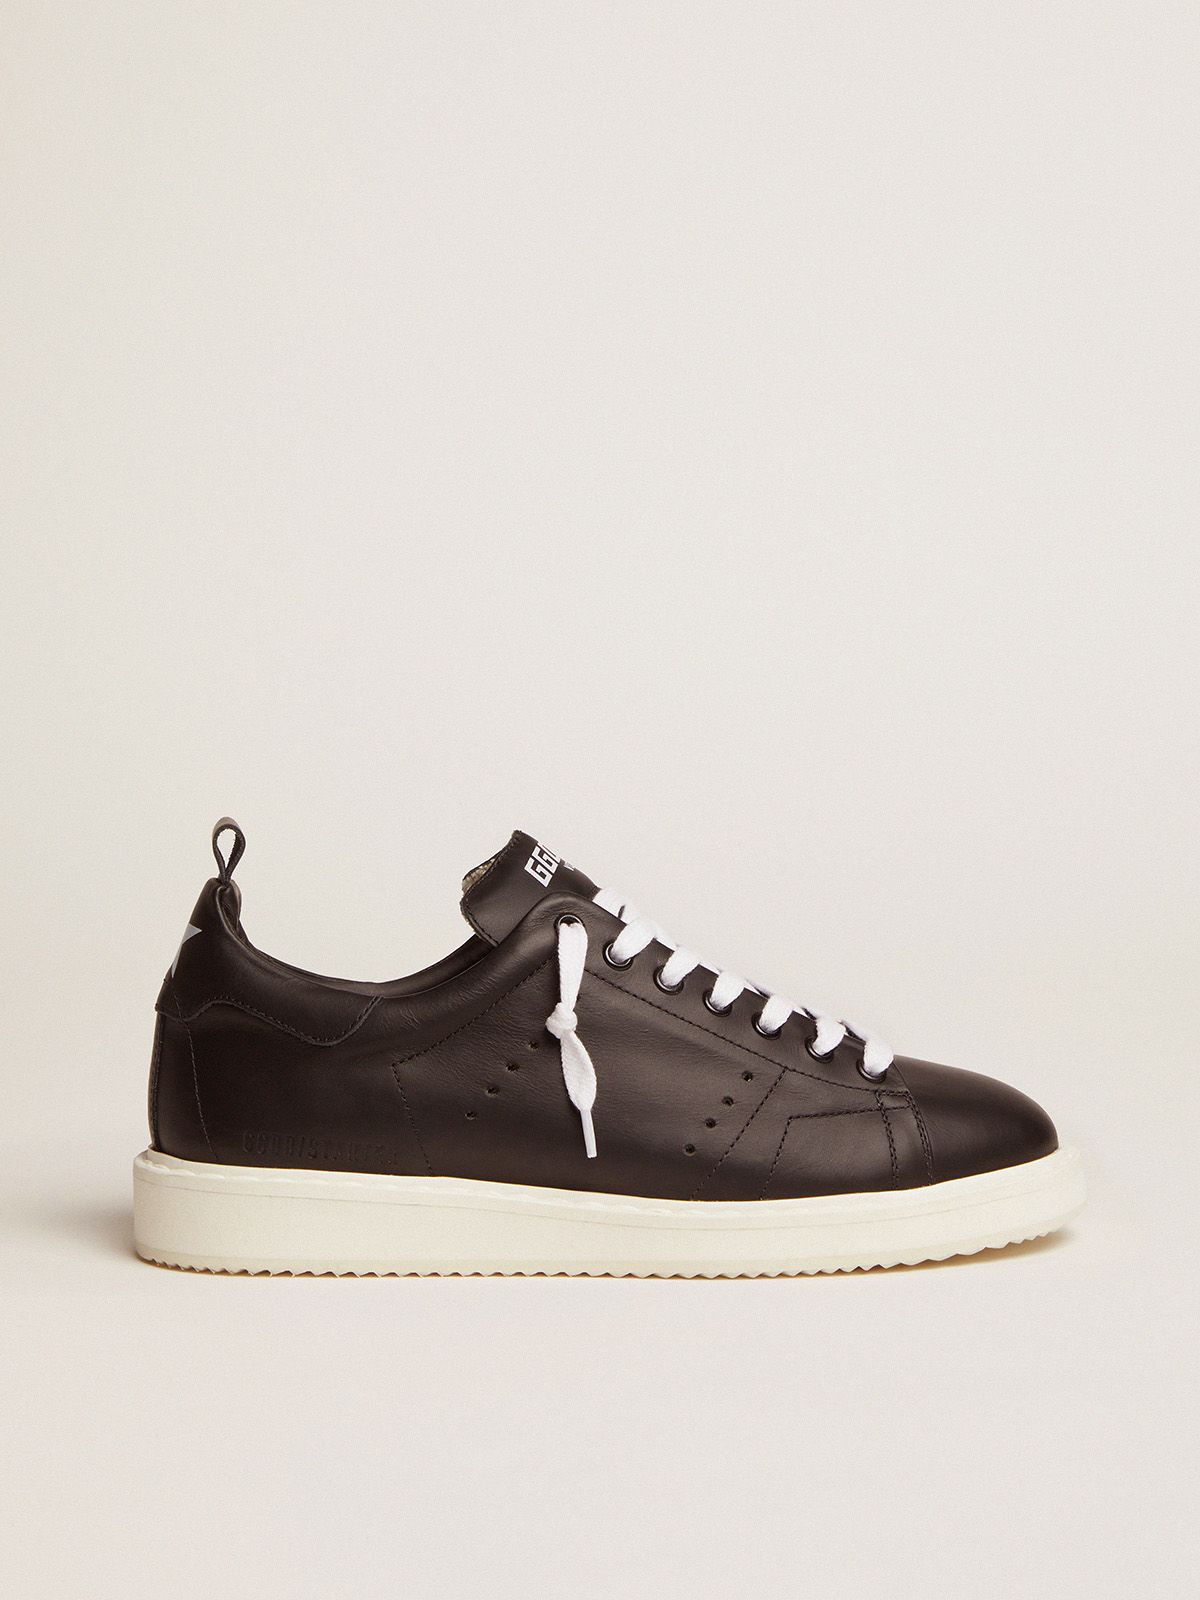 Ggdb Starter sneakers in total black leather